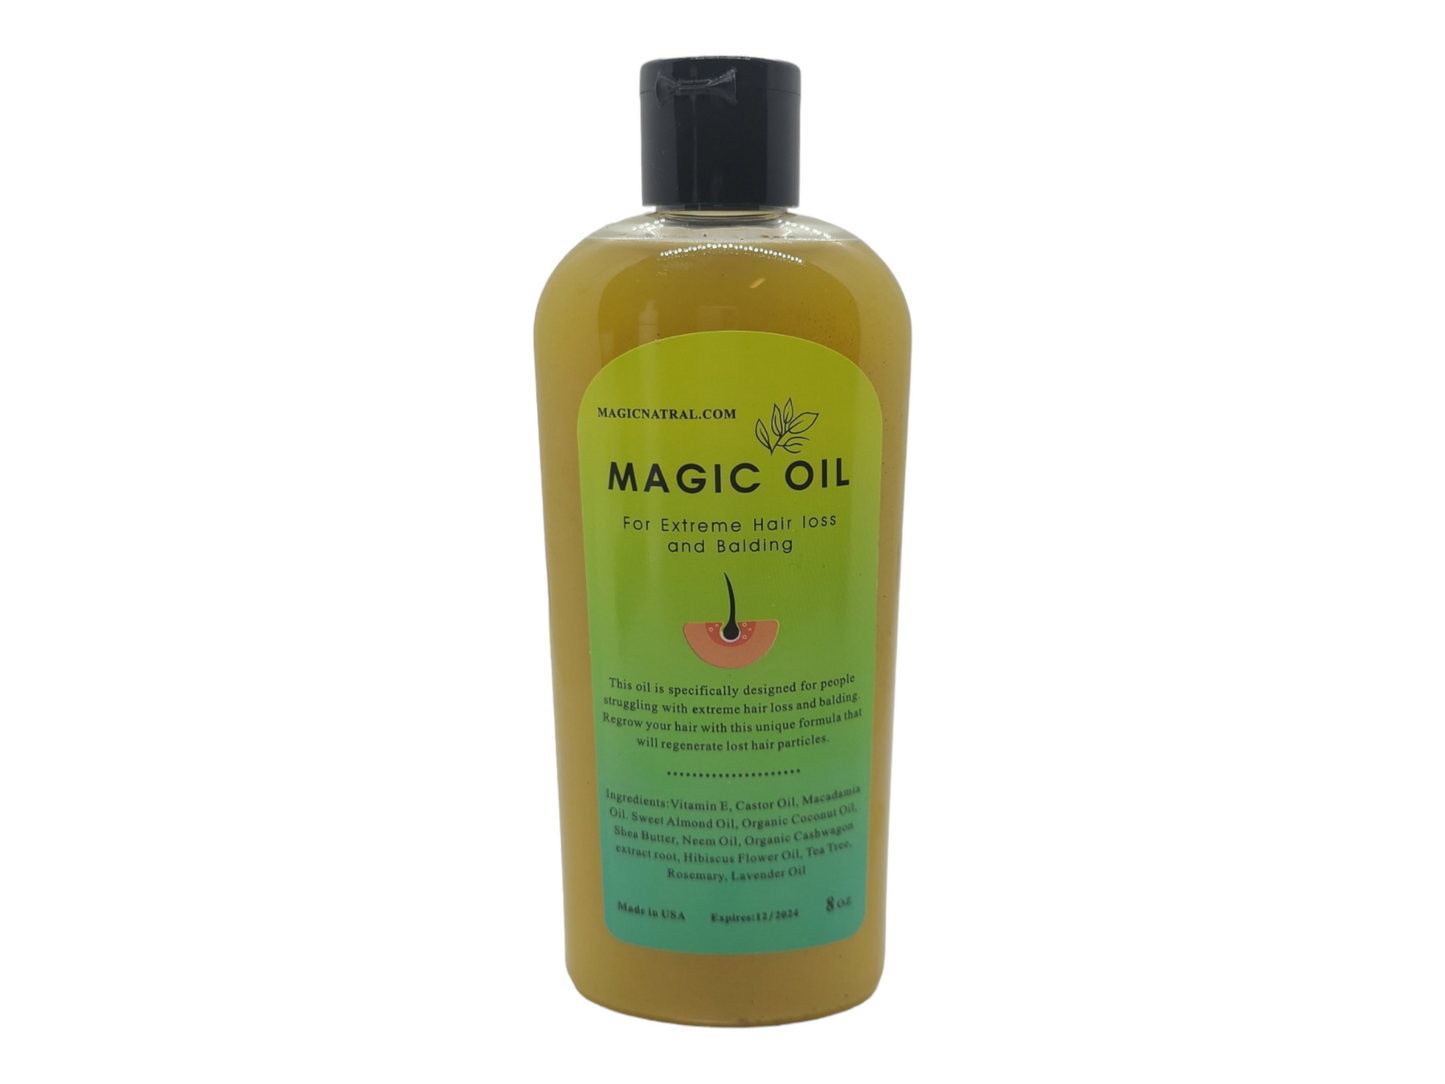 Magic oil for extreme hair loss and balding